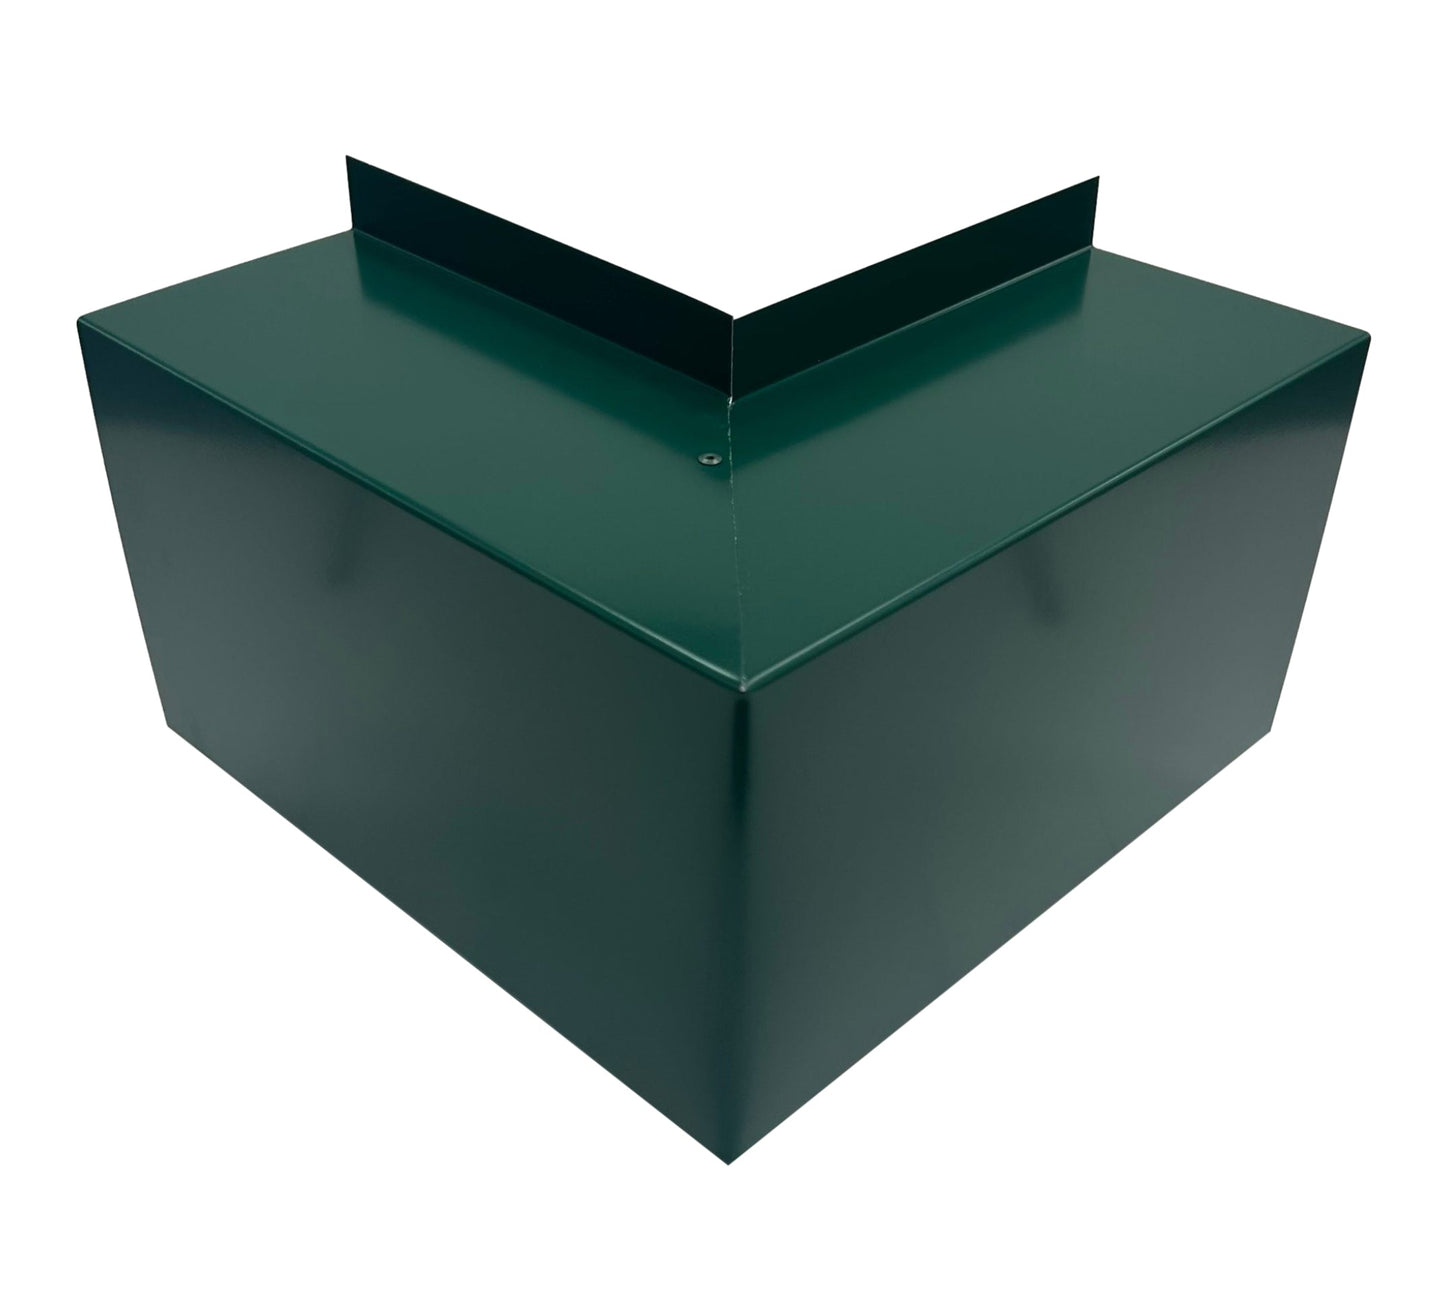 An image of a green metal Residential Series - Line Set Cover Outside Corner Elbows - Premium Quality designed for structural protection. The Perma Cover, featuring a triangular shape with sharp angles, is fabricated from a solid piece of metal, showing precision bends and a smooth finish. Its simple and easy installation makes it ideal for various applications. The background is plain white.